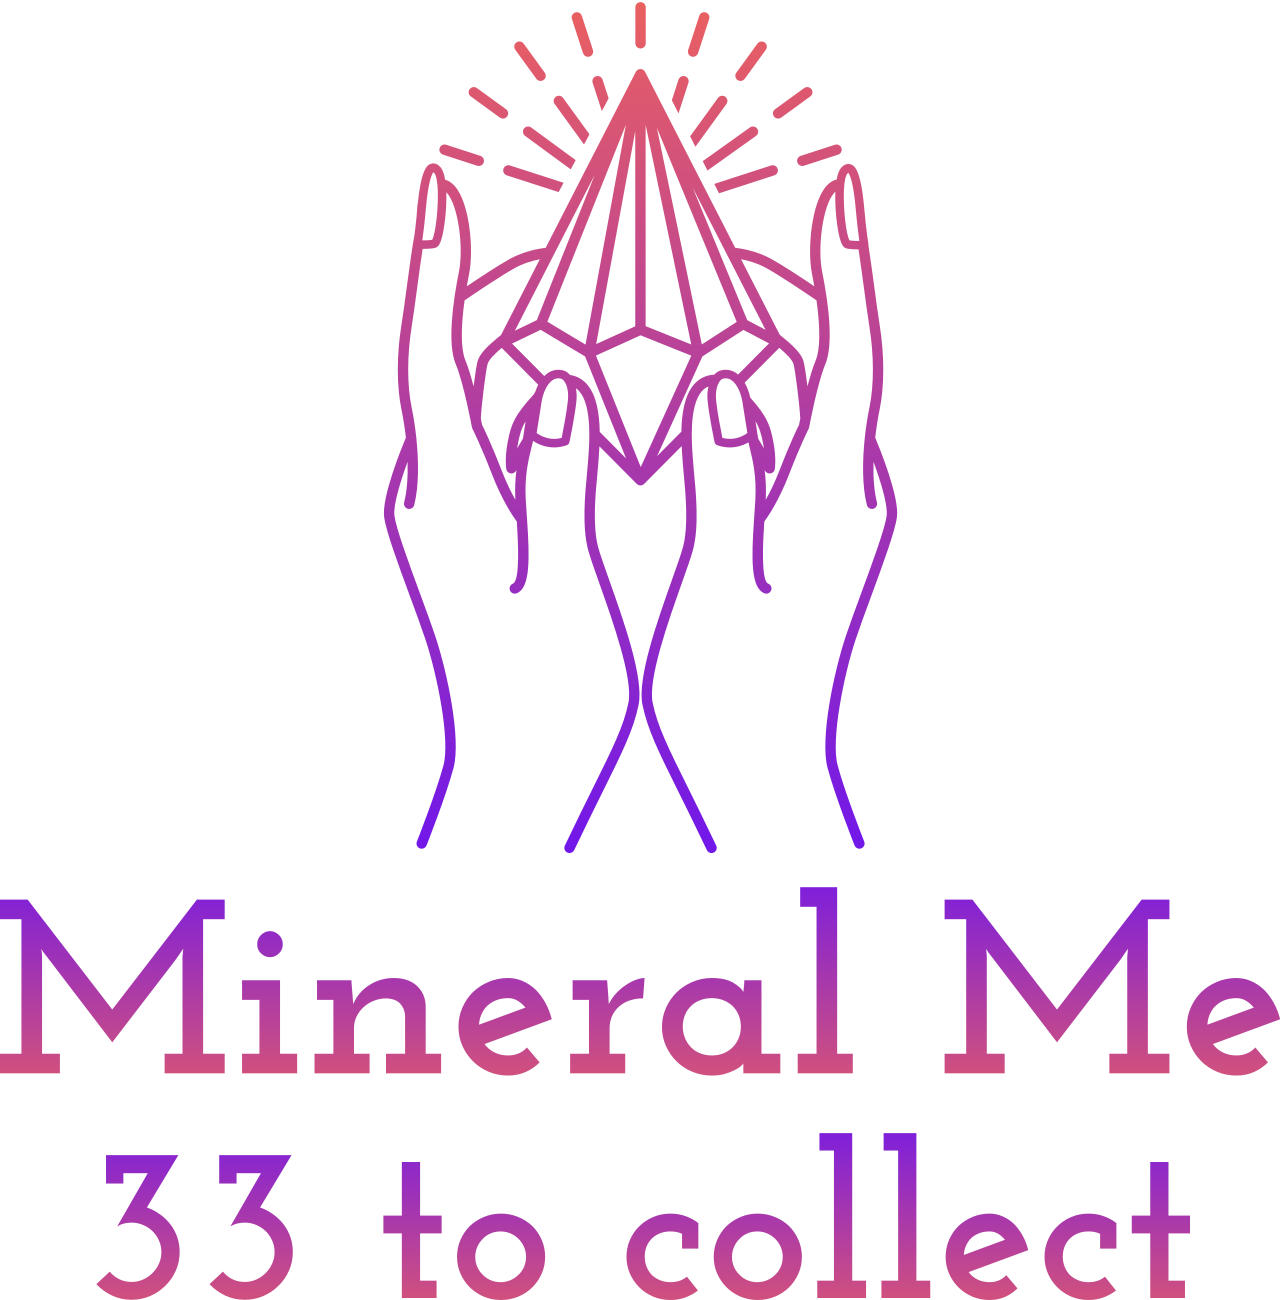 Mineral Me's web page